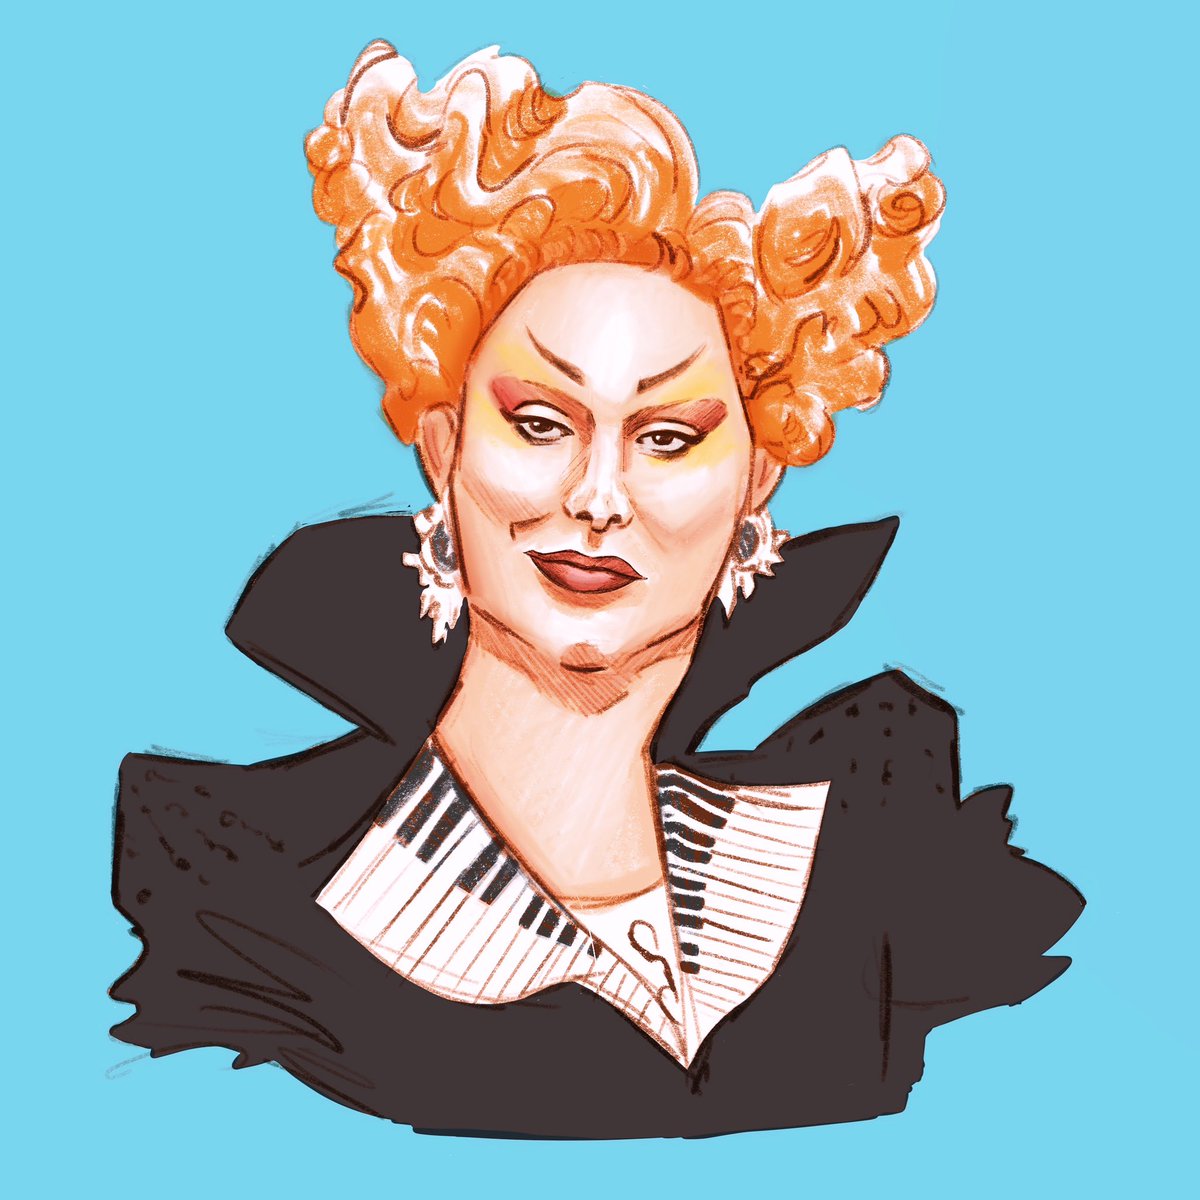 Gave myself the duration of the new #doctorwho episode to draw @thejinkx as The Maestro.